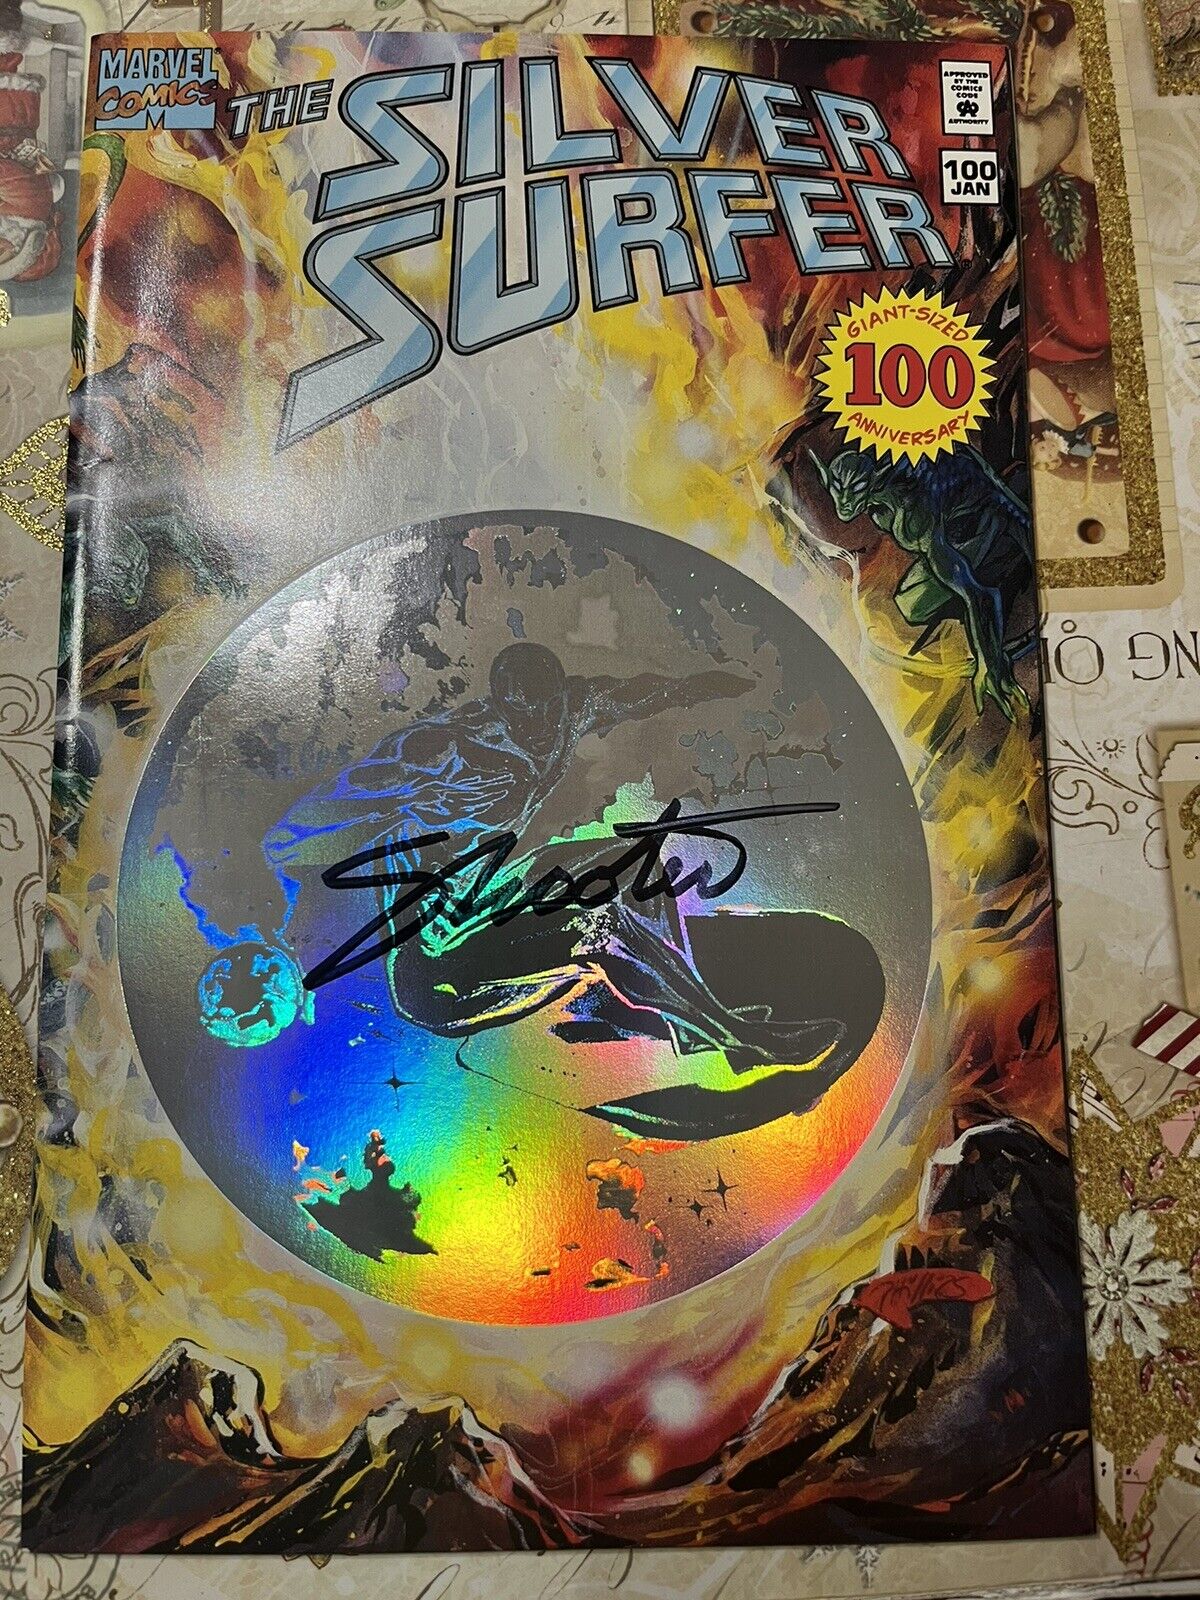 Stan Lee’s Marvel, 1995 The Silver Surfer #100 Anniversary Signed By Jim Shooter